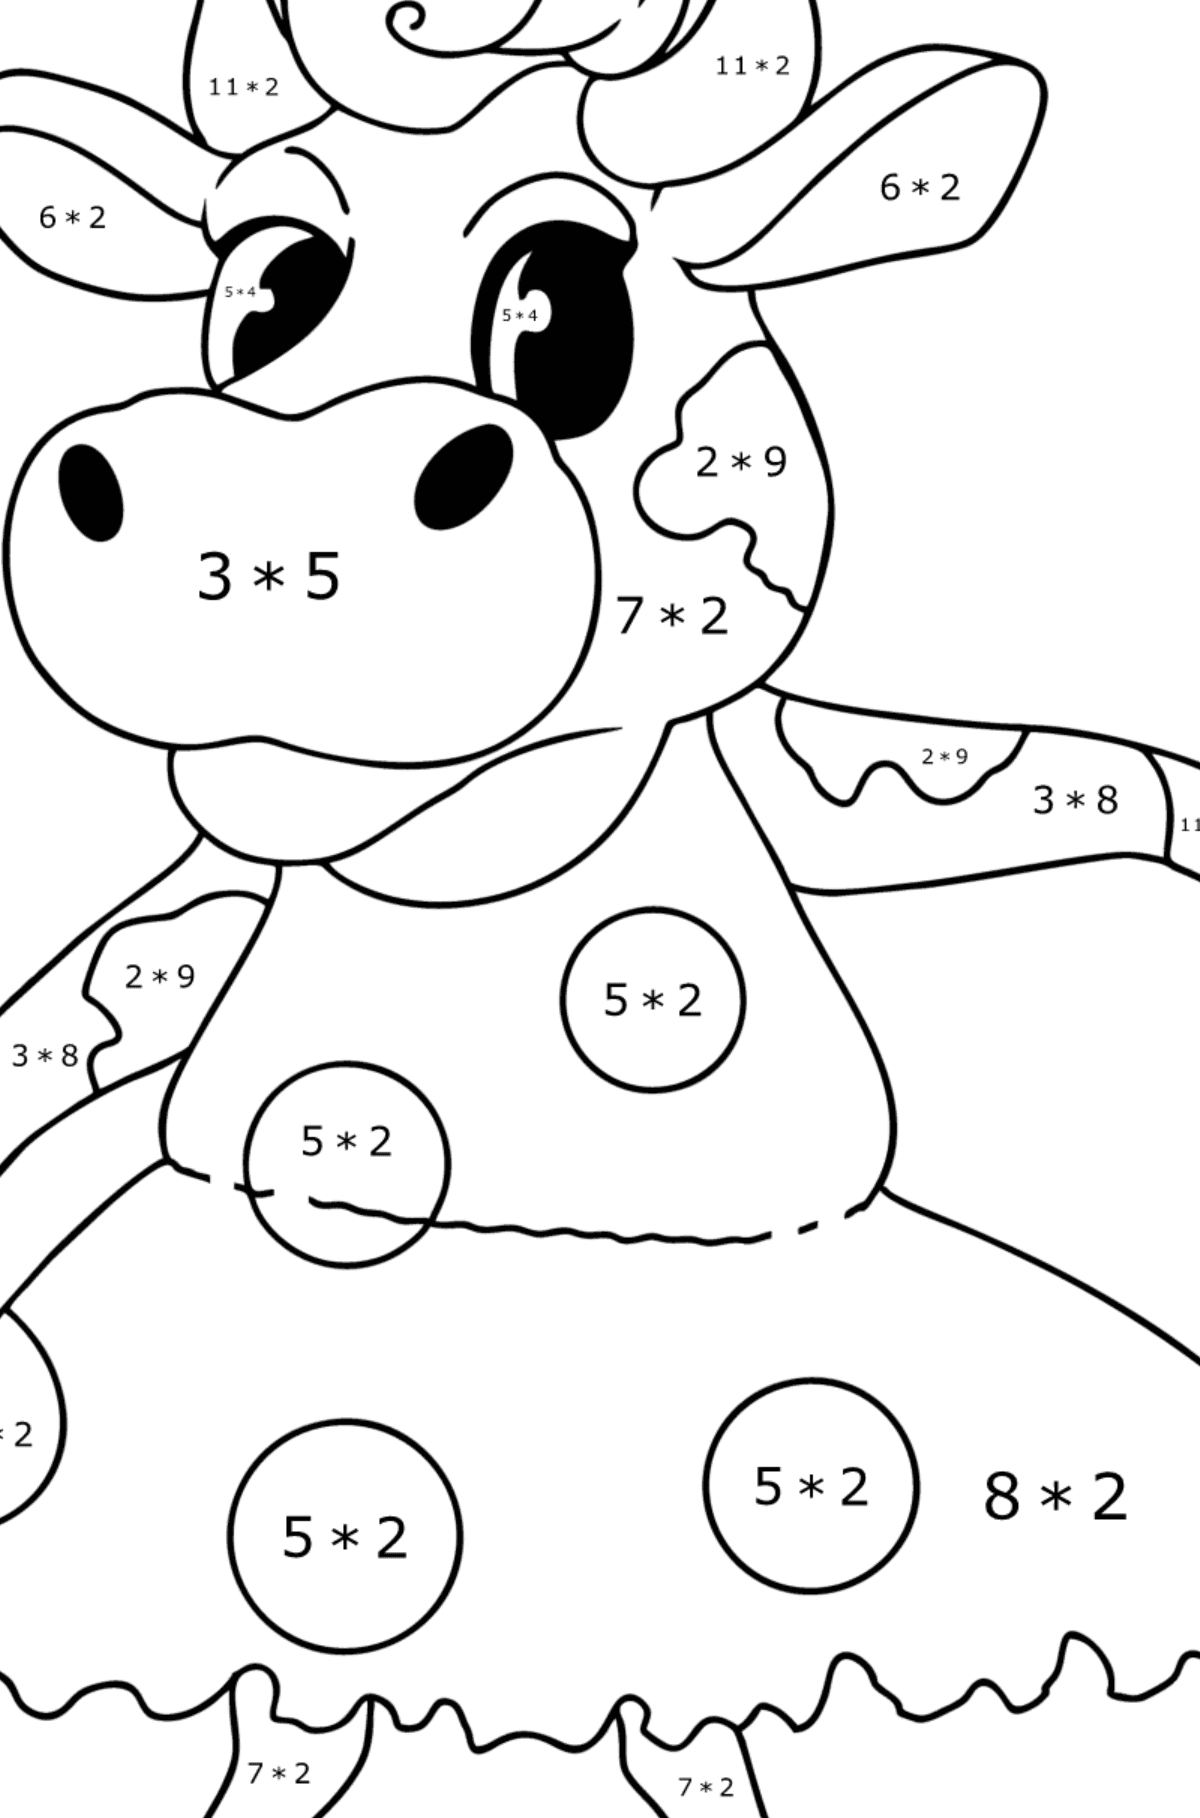 Kawaii cow standing up coloring page - Math Coloring - Multiplication for Kids